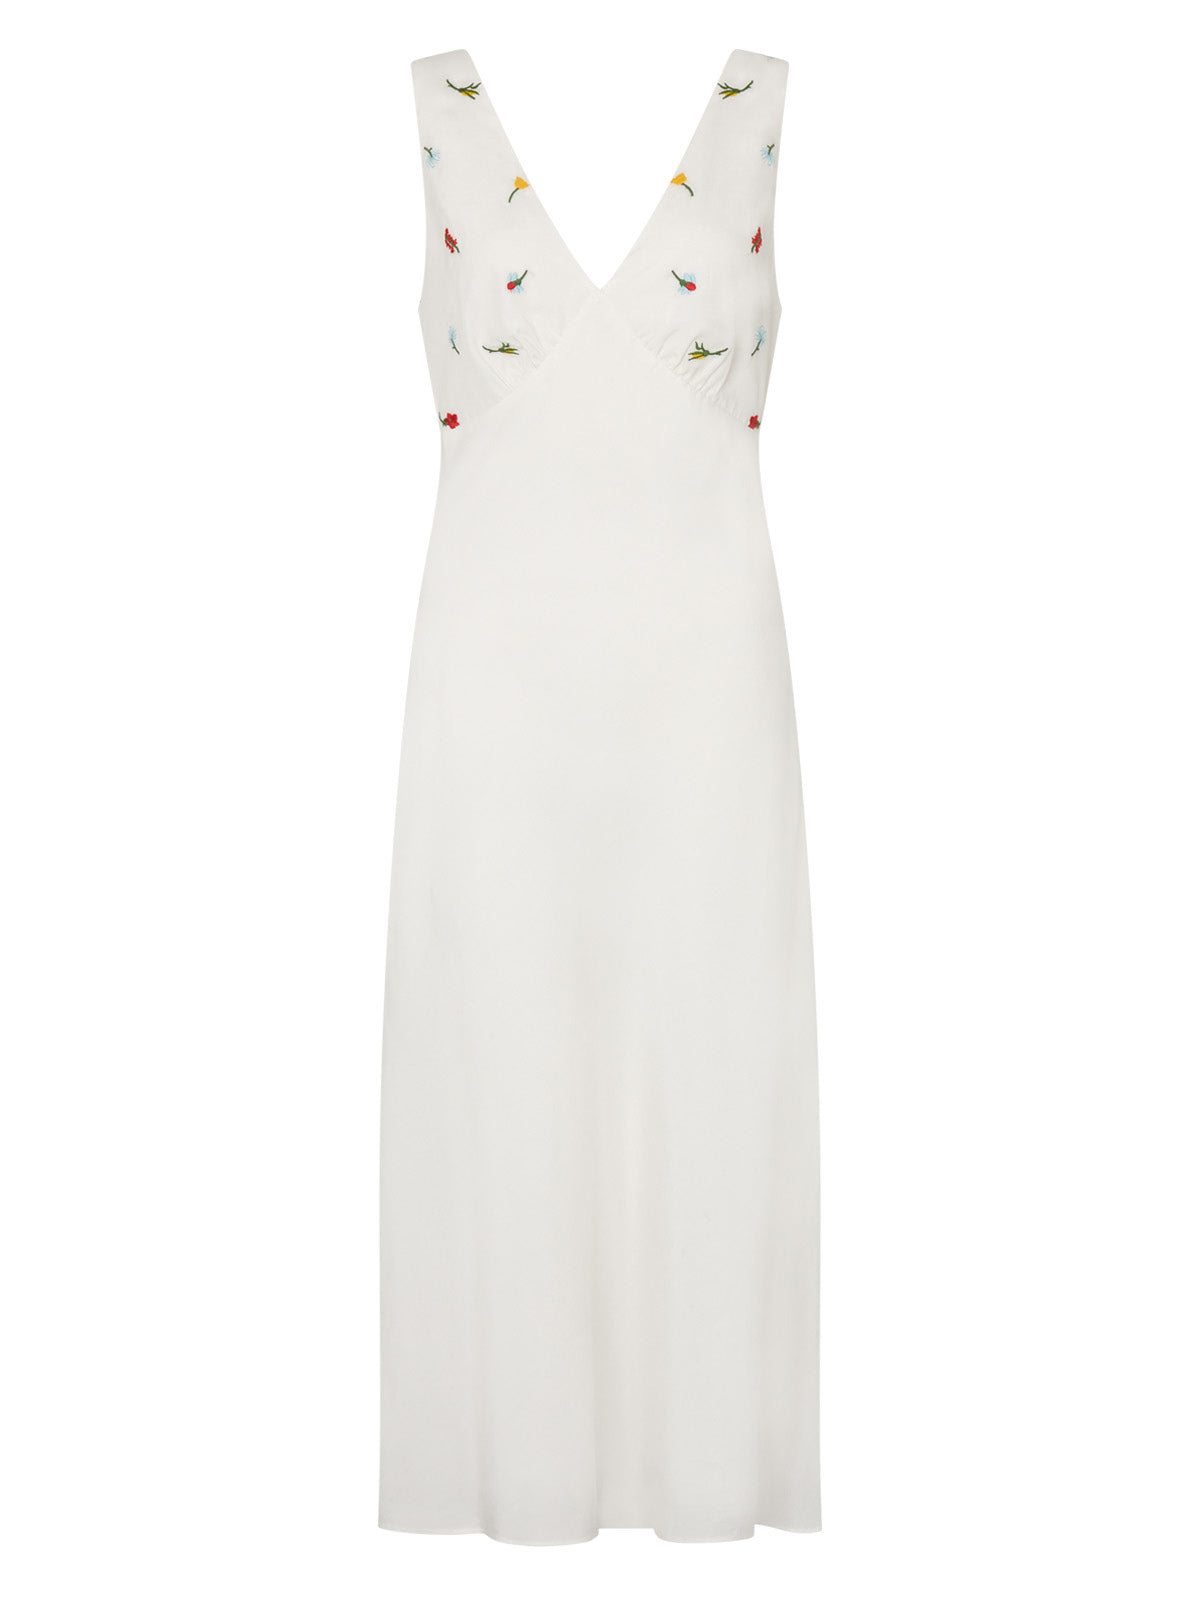 Claire White Vintage Floral Embroidered Slip Dress By KITRI Studio